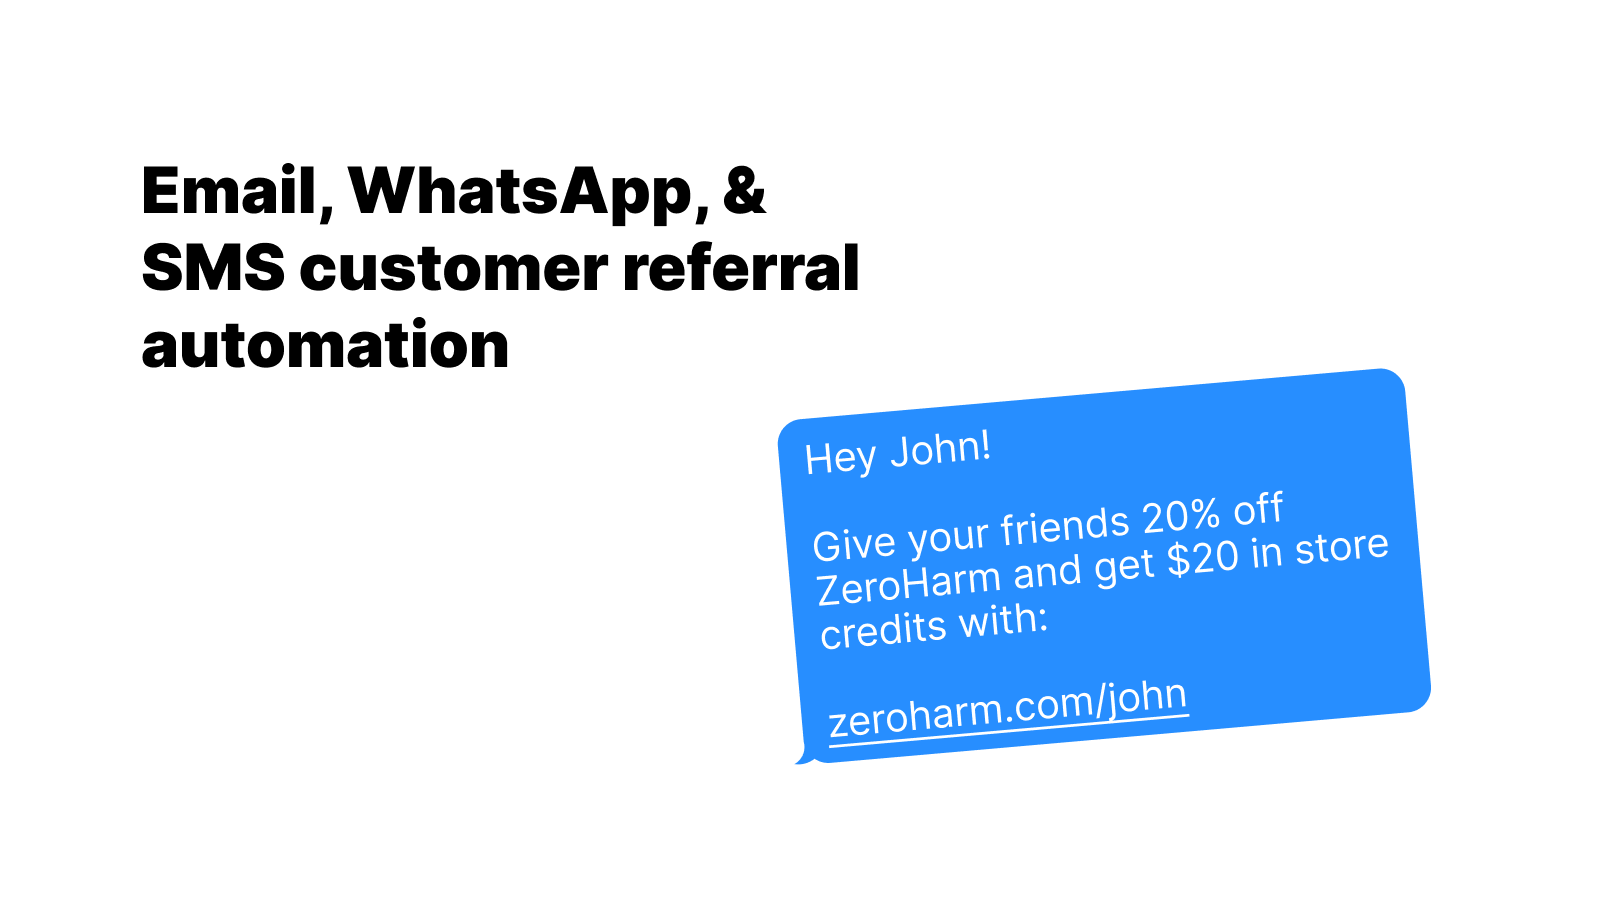 Reach new customers and retain old ones with a referral program